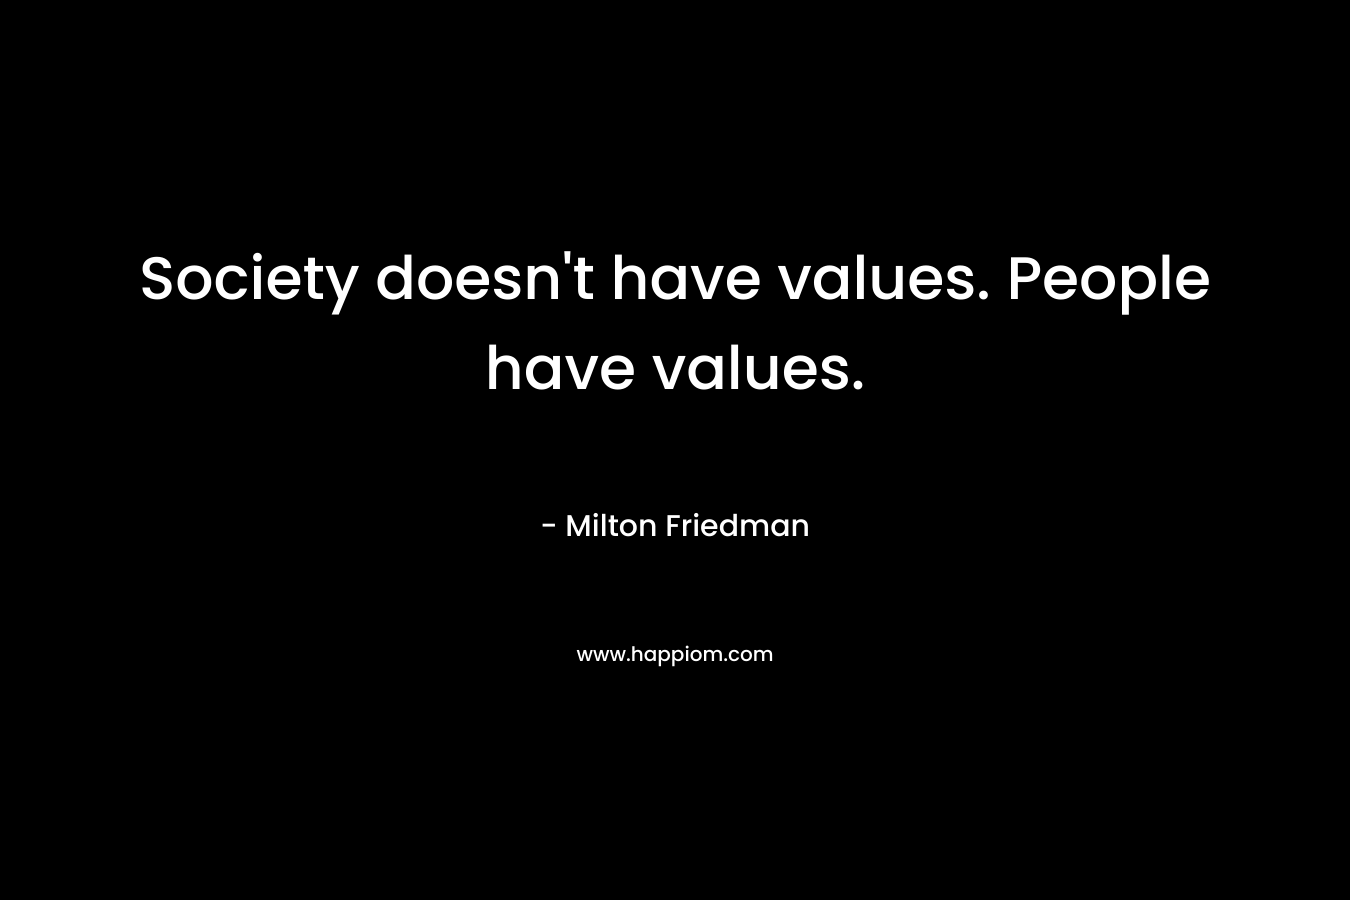 Society doesn't have values. People have values.